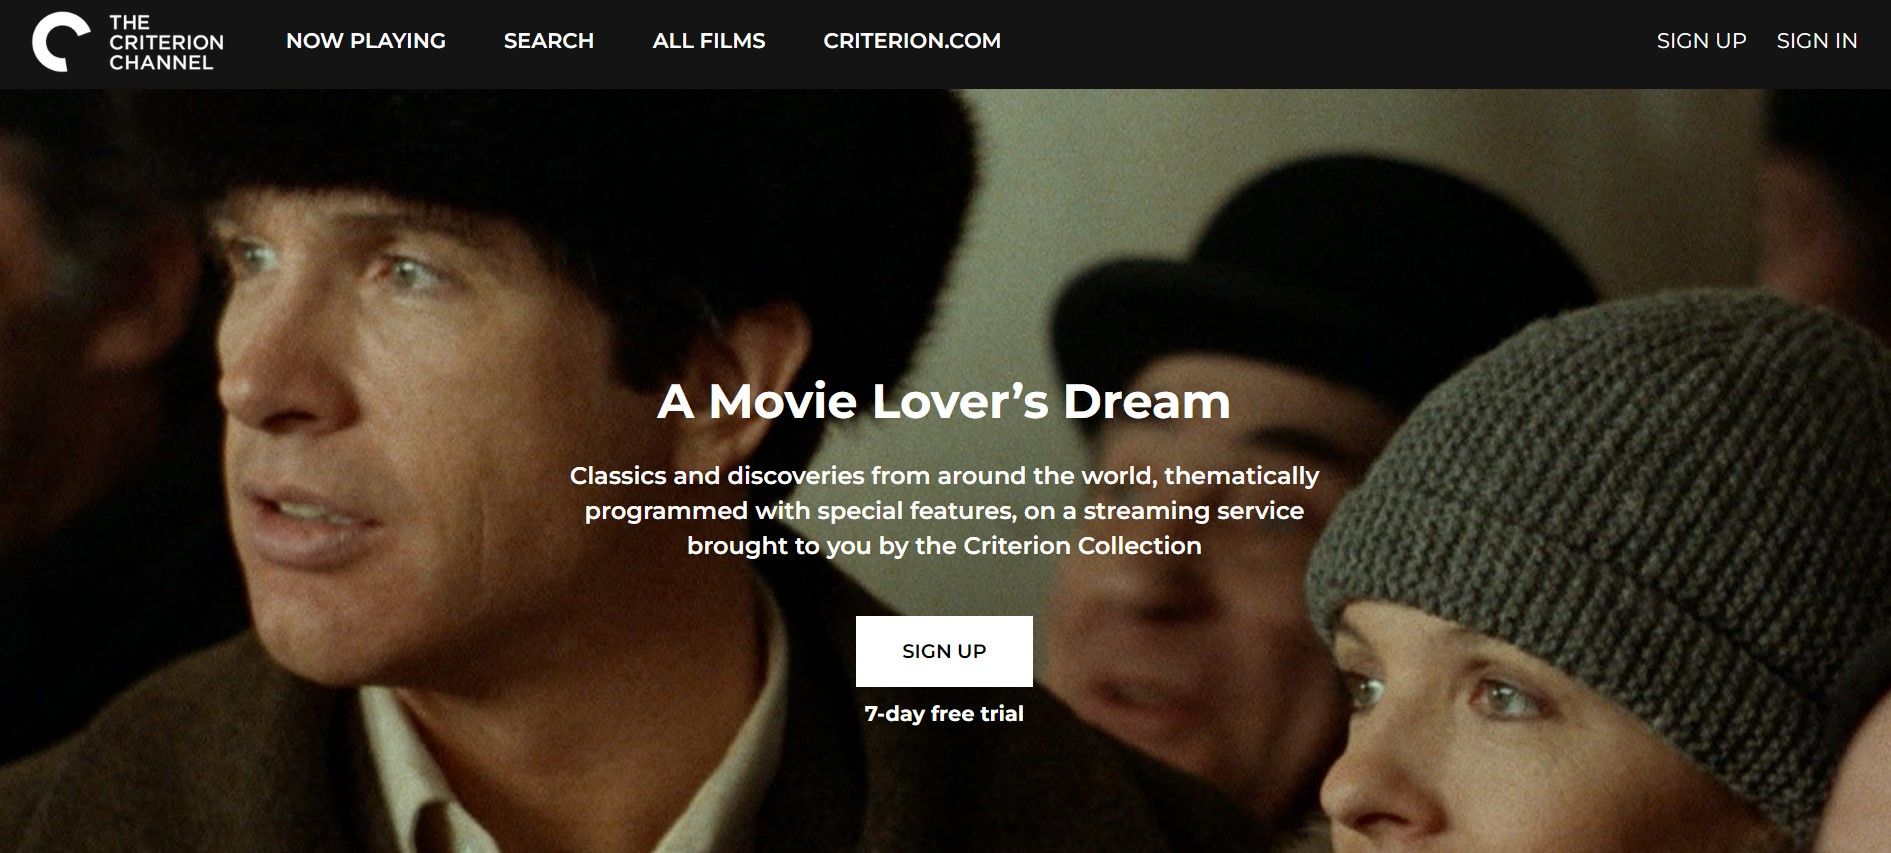 The Criterion Channel homepage